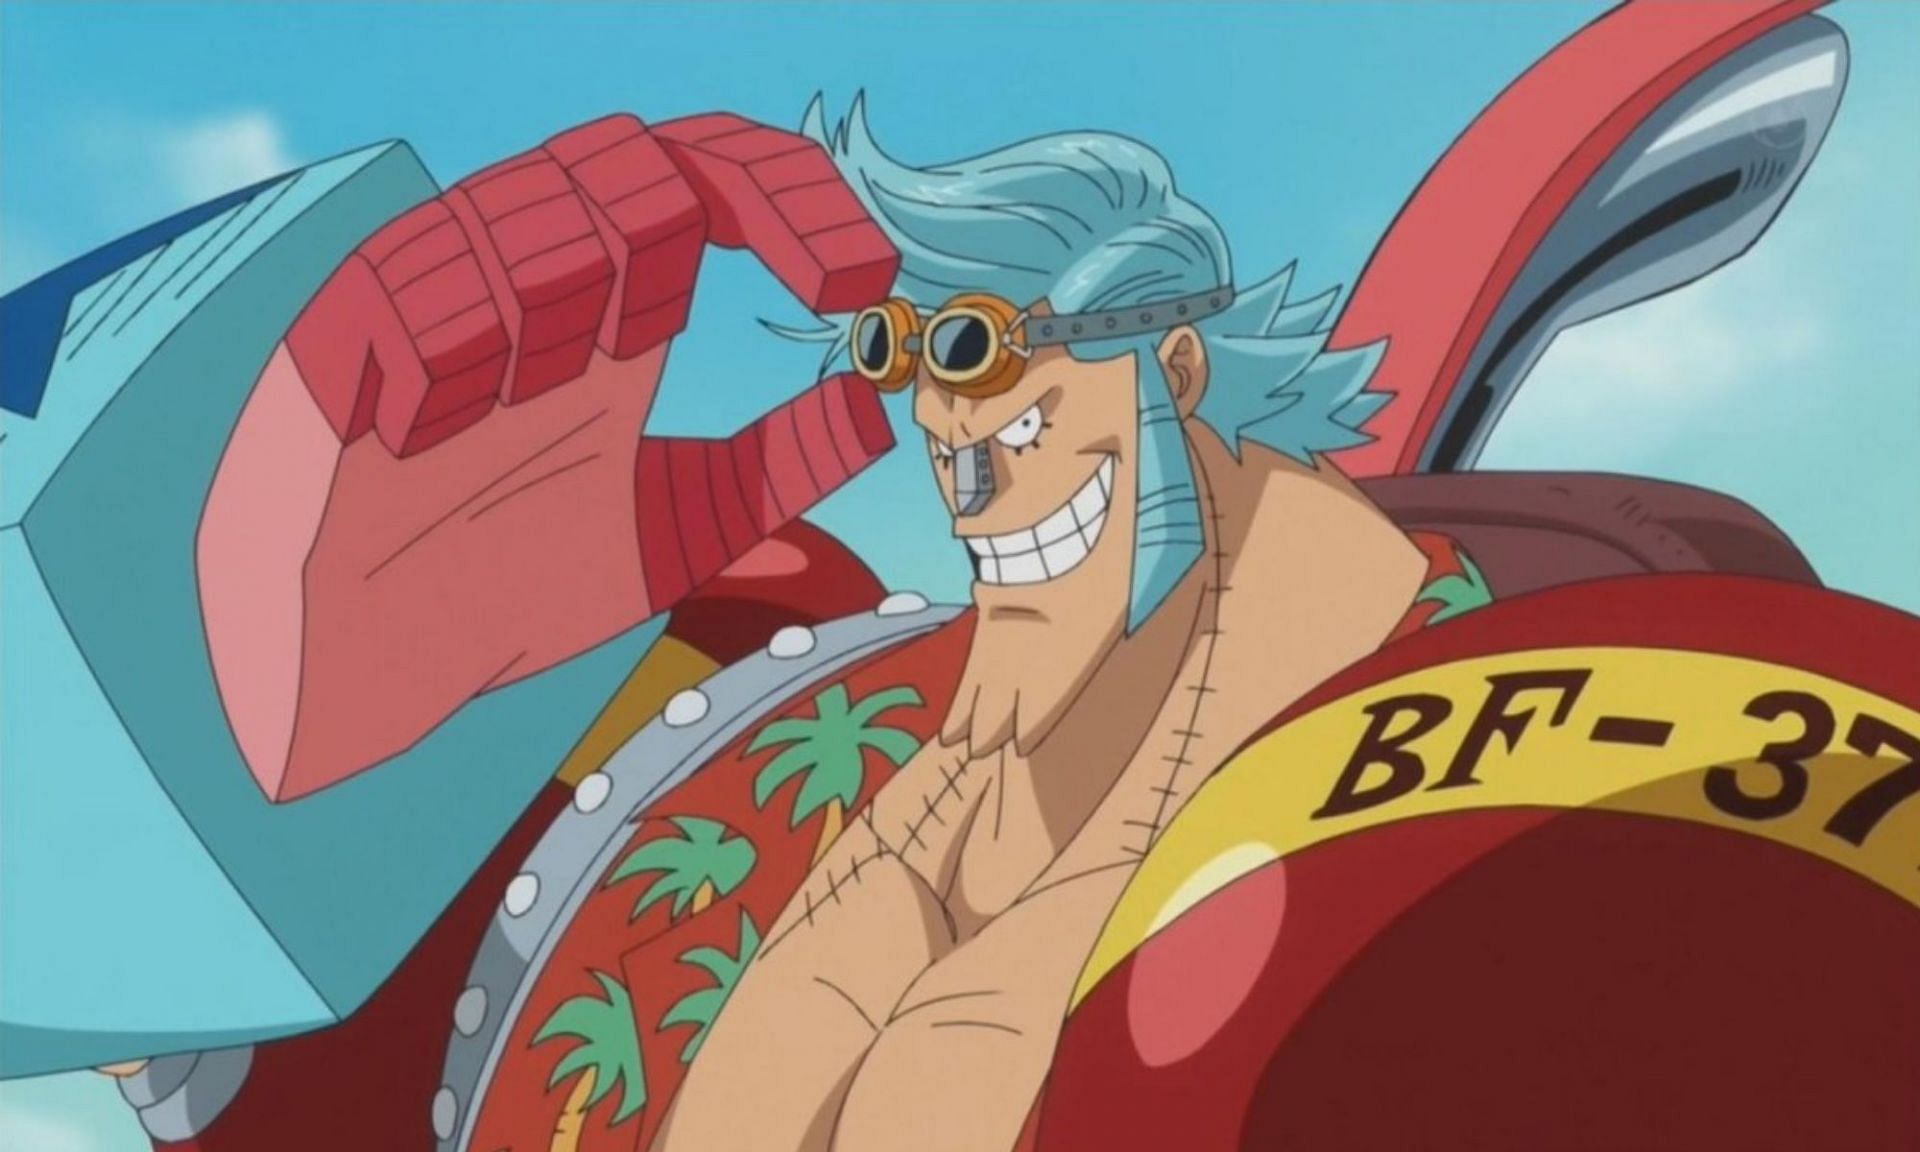 Franky is always known for his SUPER cool moves